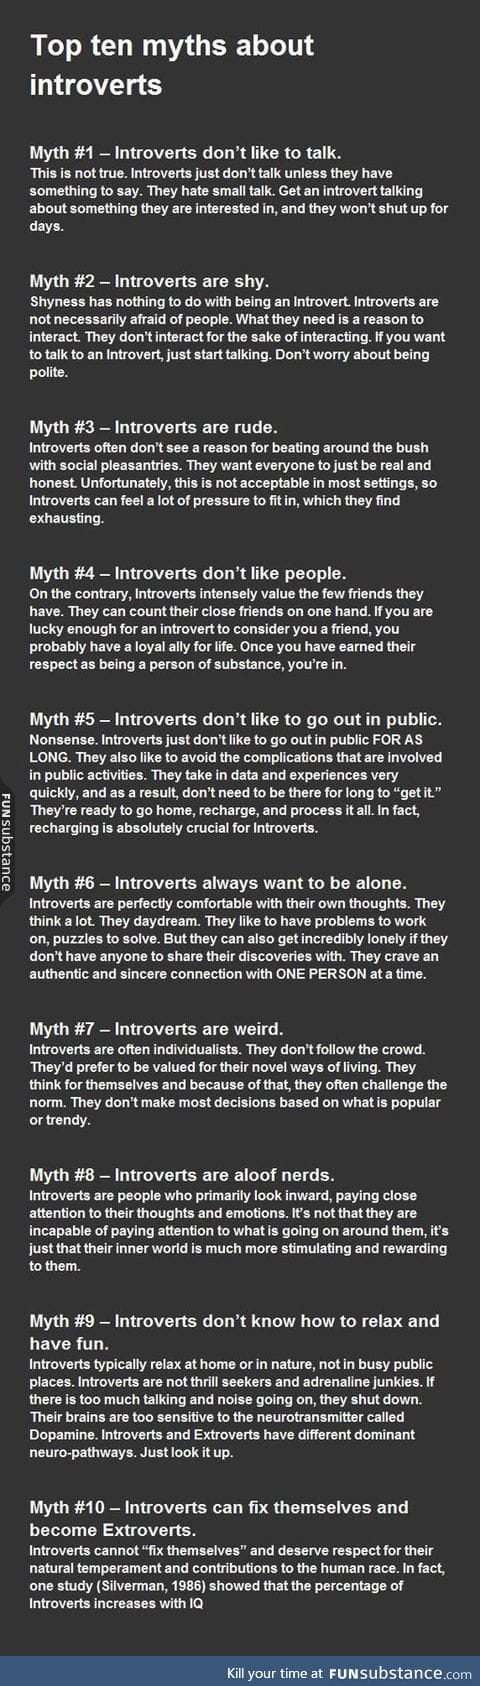 Myths about introvert people